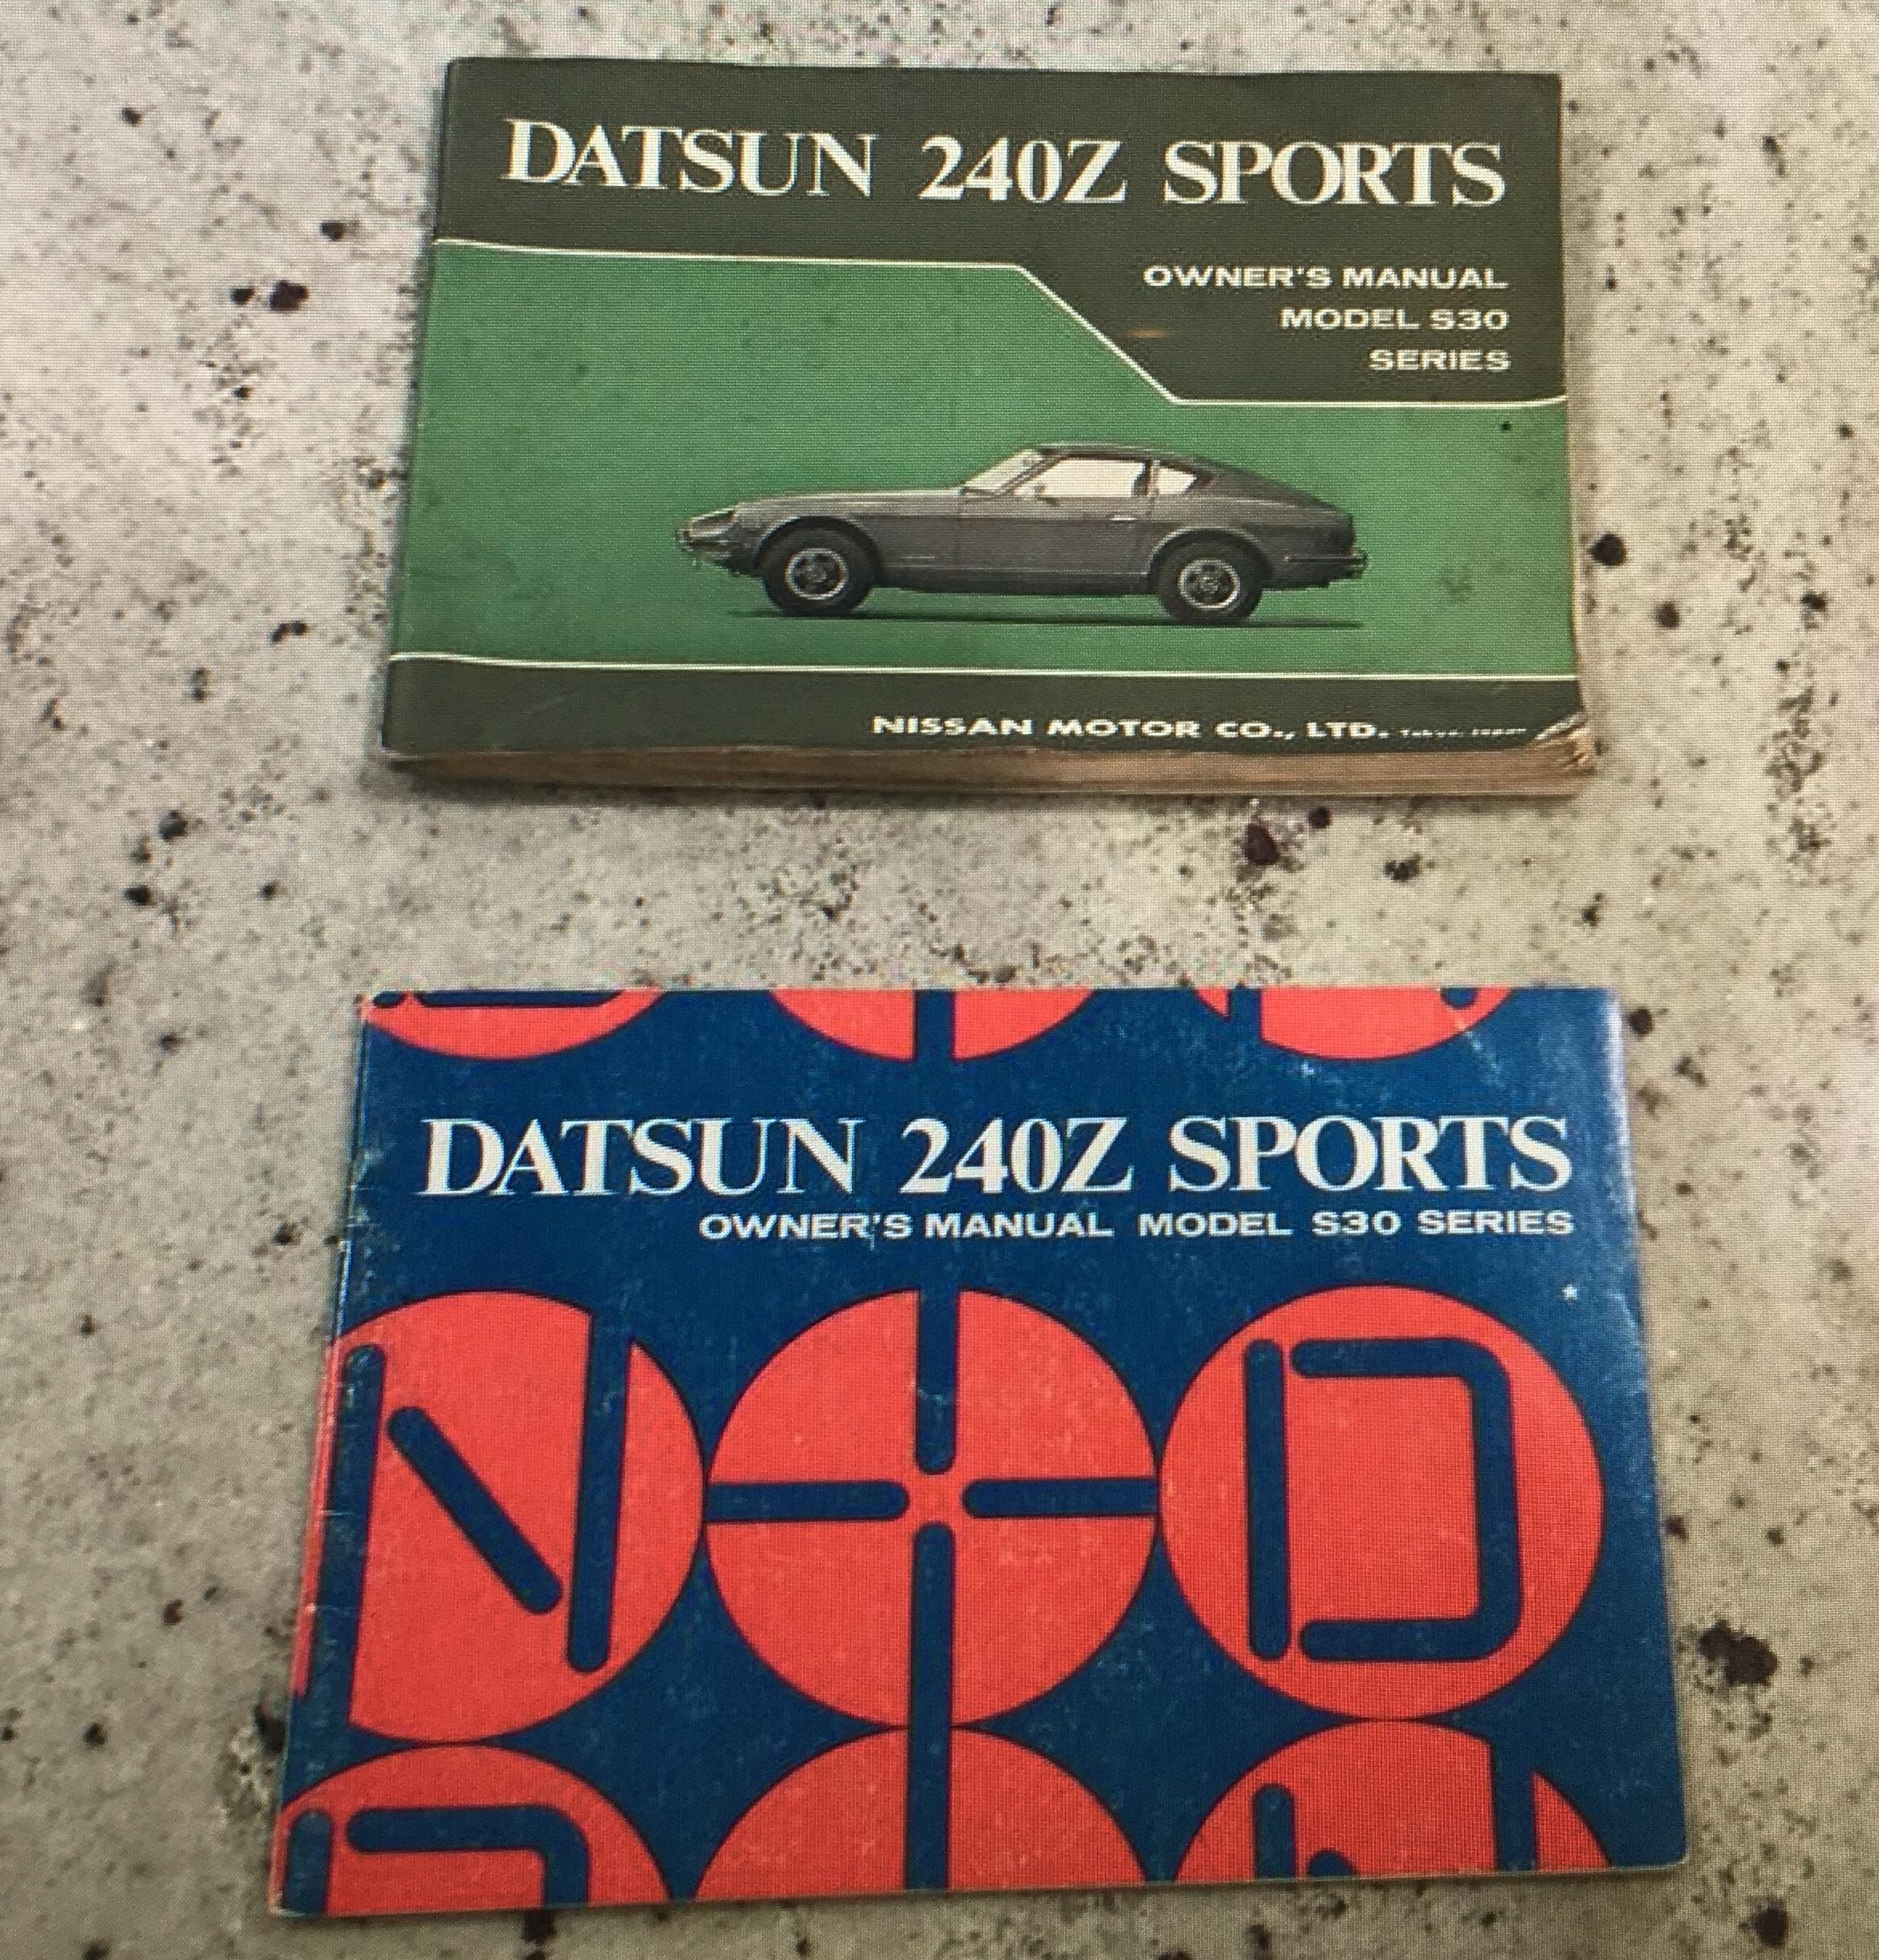 240Z 1972 DATSUN OWNERS MANUAL NISSAN OWNER'S BOOK